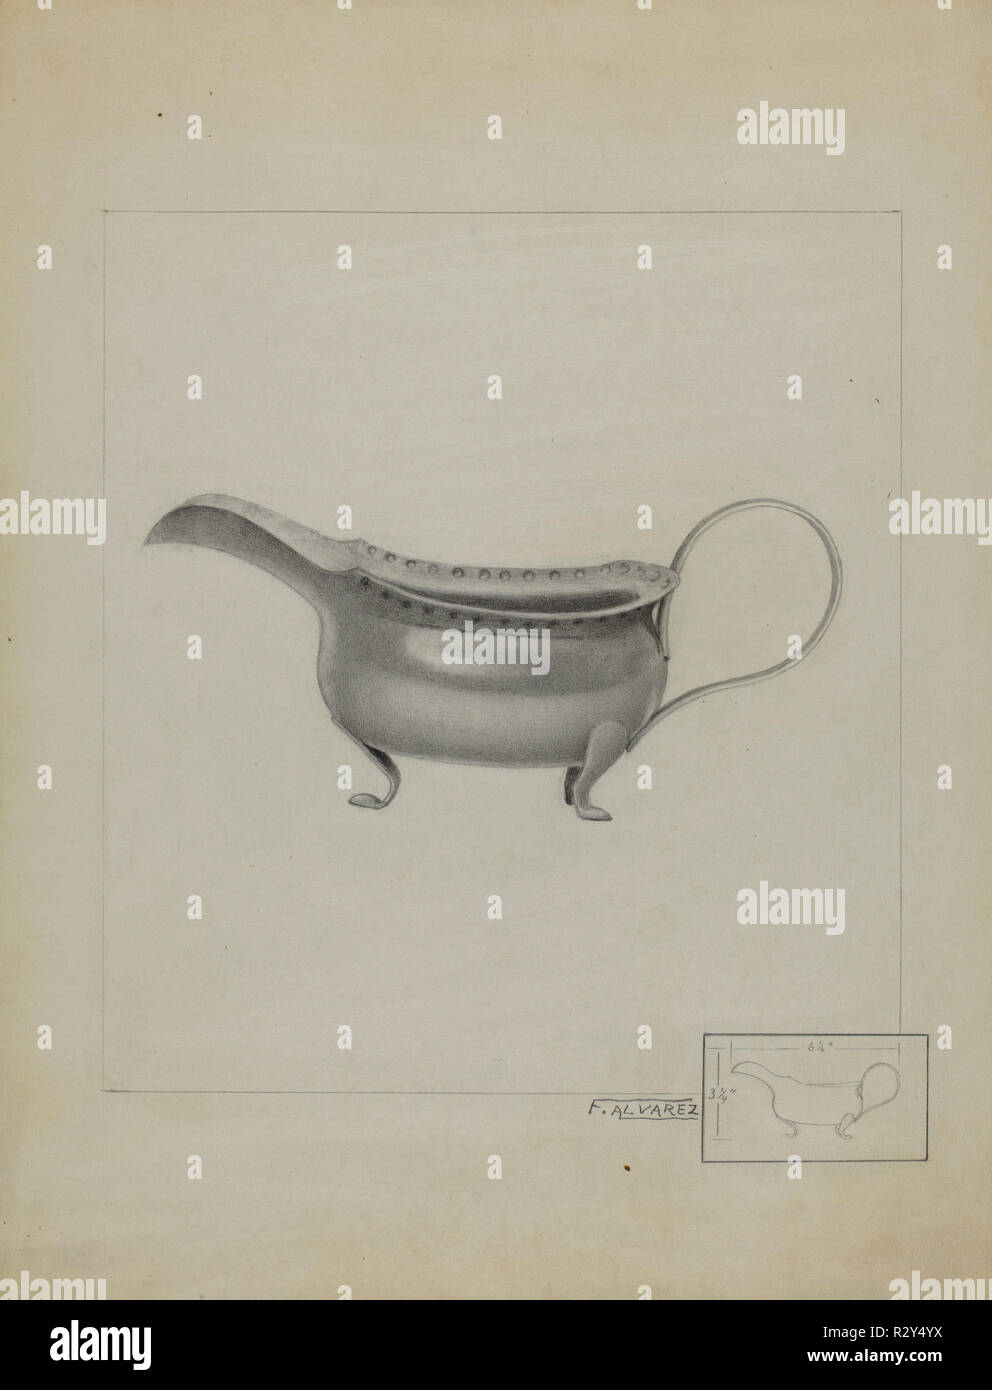 Silver Sauce Boat. Dated: 1936. Dimensions: overall: 29.9 x 22.9 cm (11 3/4 x 9 in.)  Original IAD Object: 3' high; 3 1/4' wide; 6 1/2' long. Medium: graphite on paper. Museum: National Gallery of Art, Washington DC. Author: Francisco Alvarez. Stock Photo